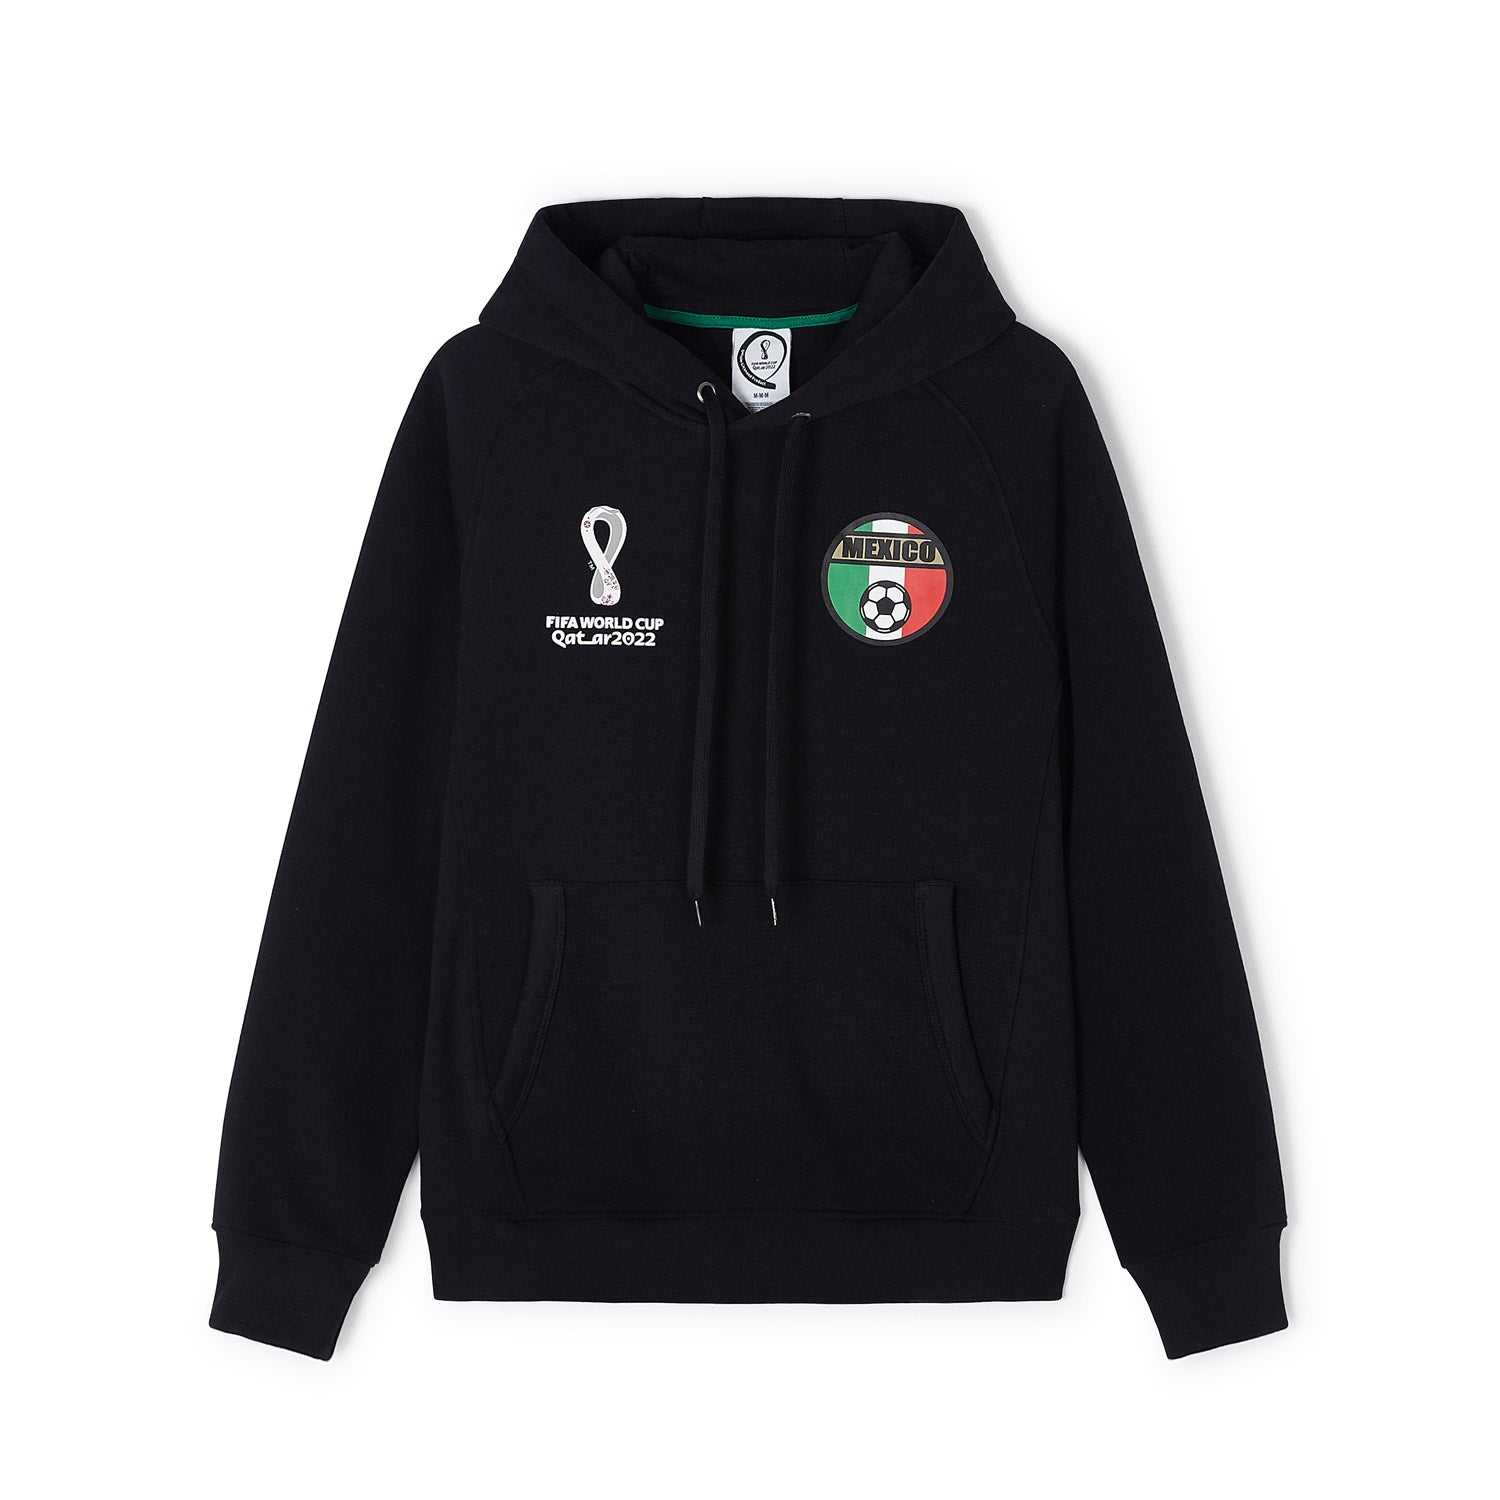 2022 World Cup Mexico Black Hoodie - Men's